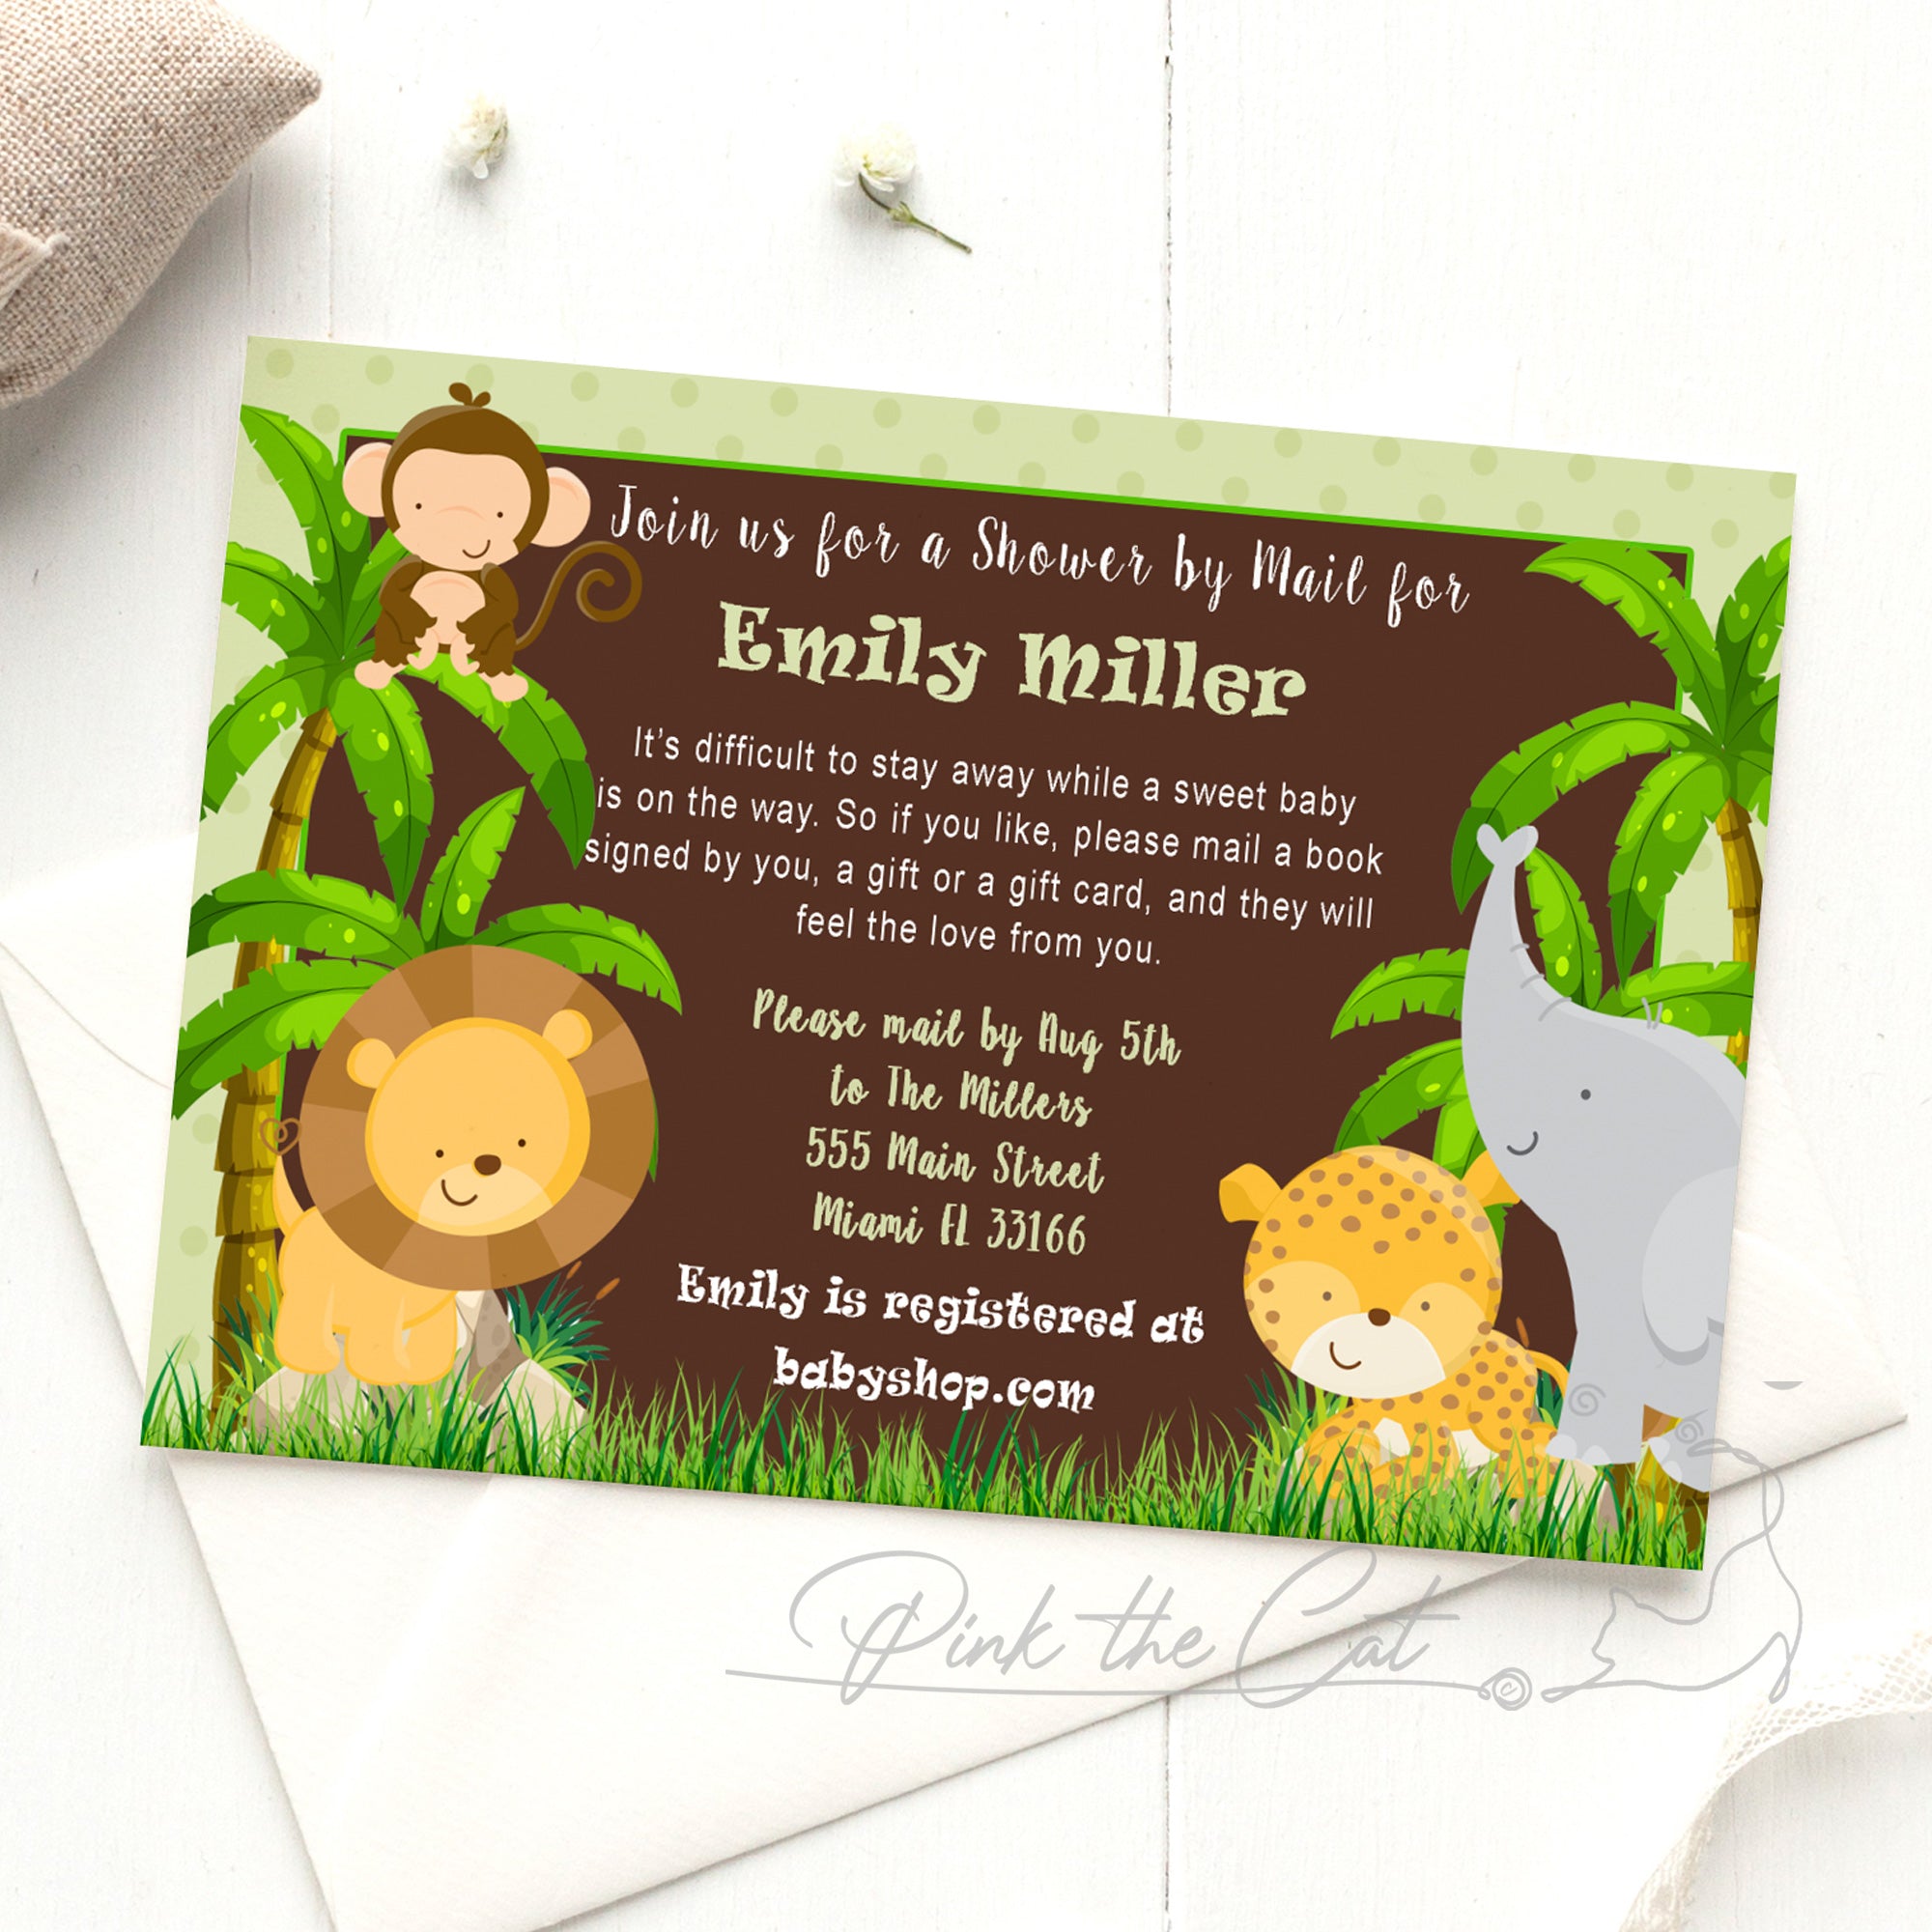 Jungle invitation shower by mail